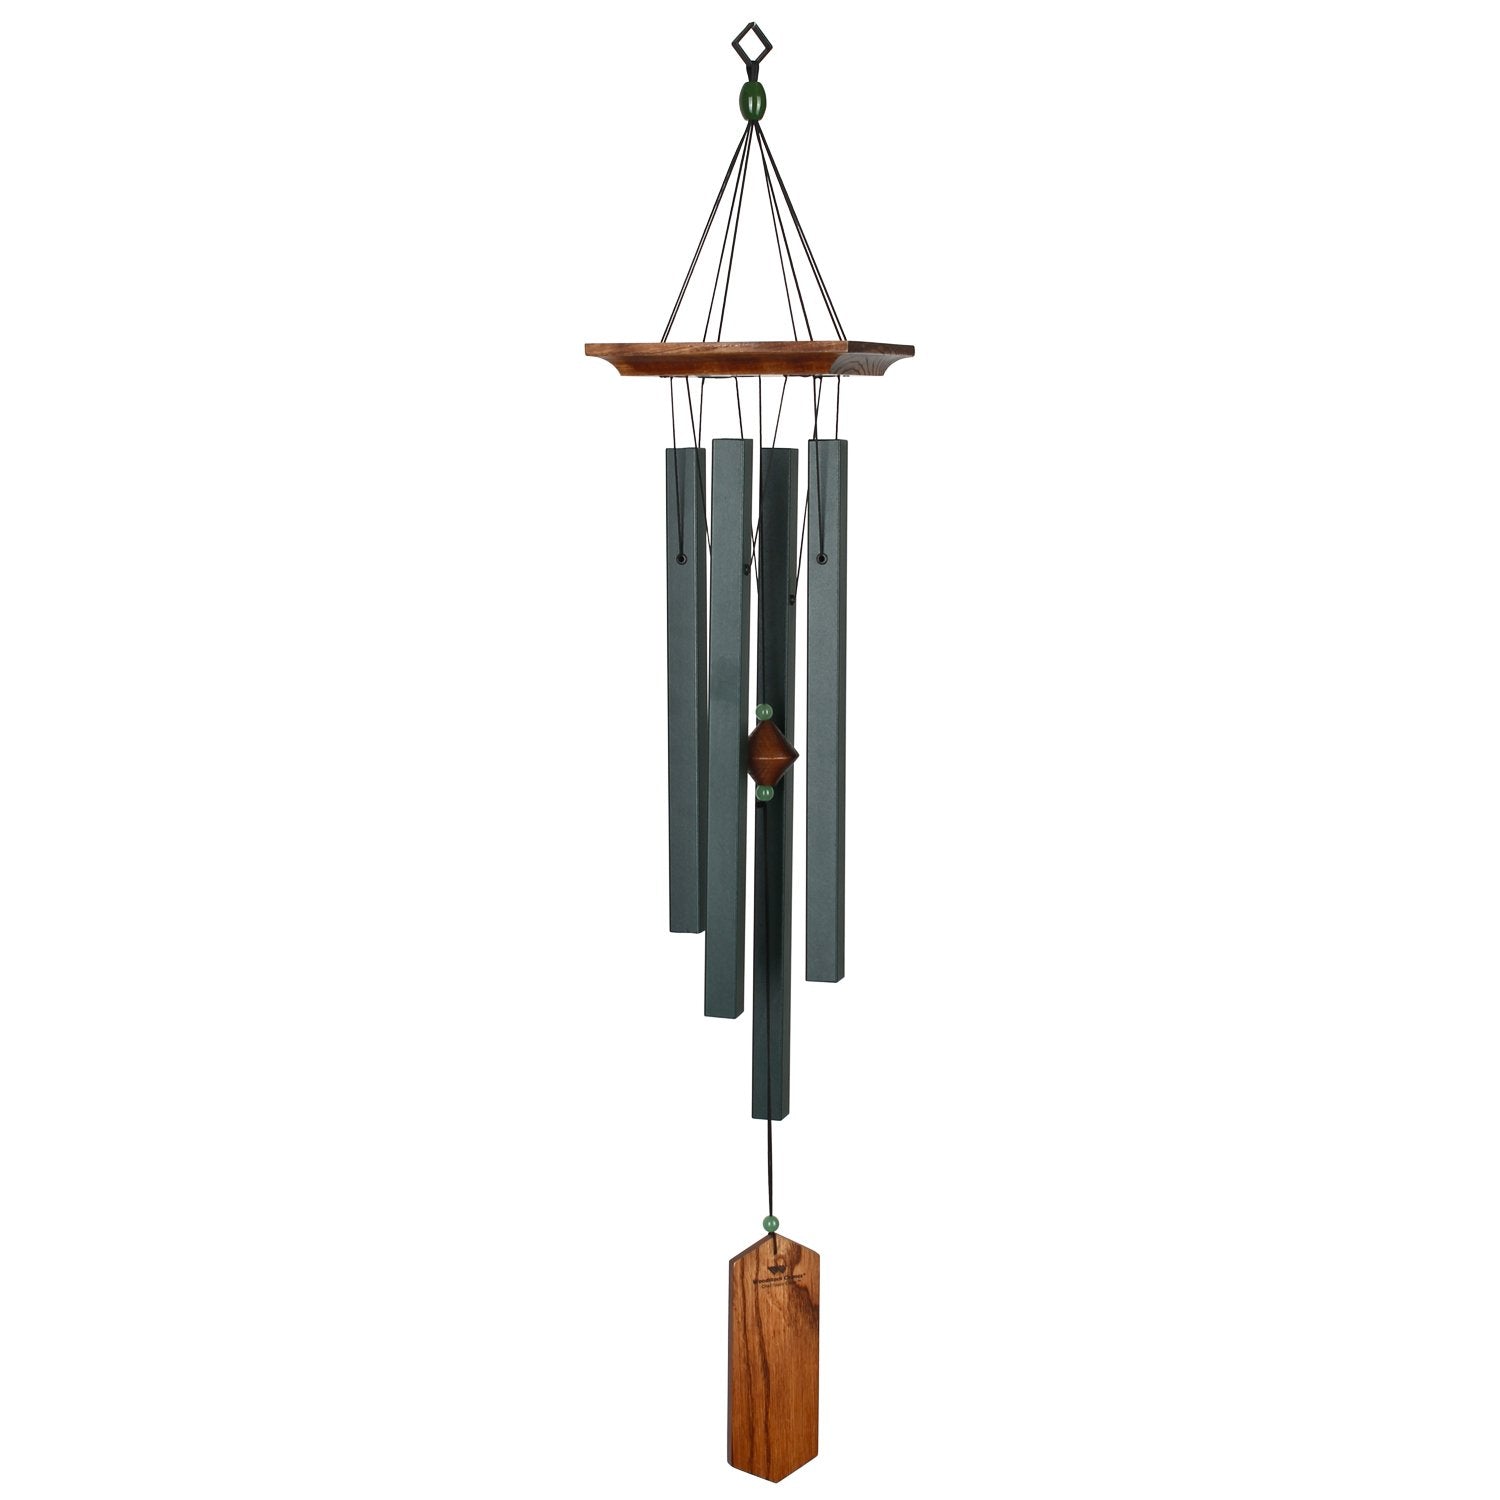 Craftsman Chime - Evergreen full product image